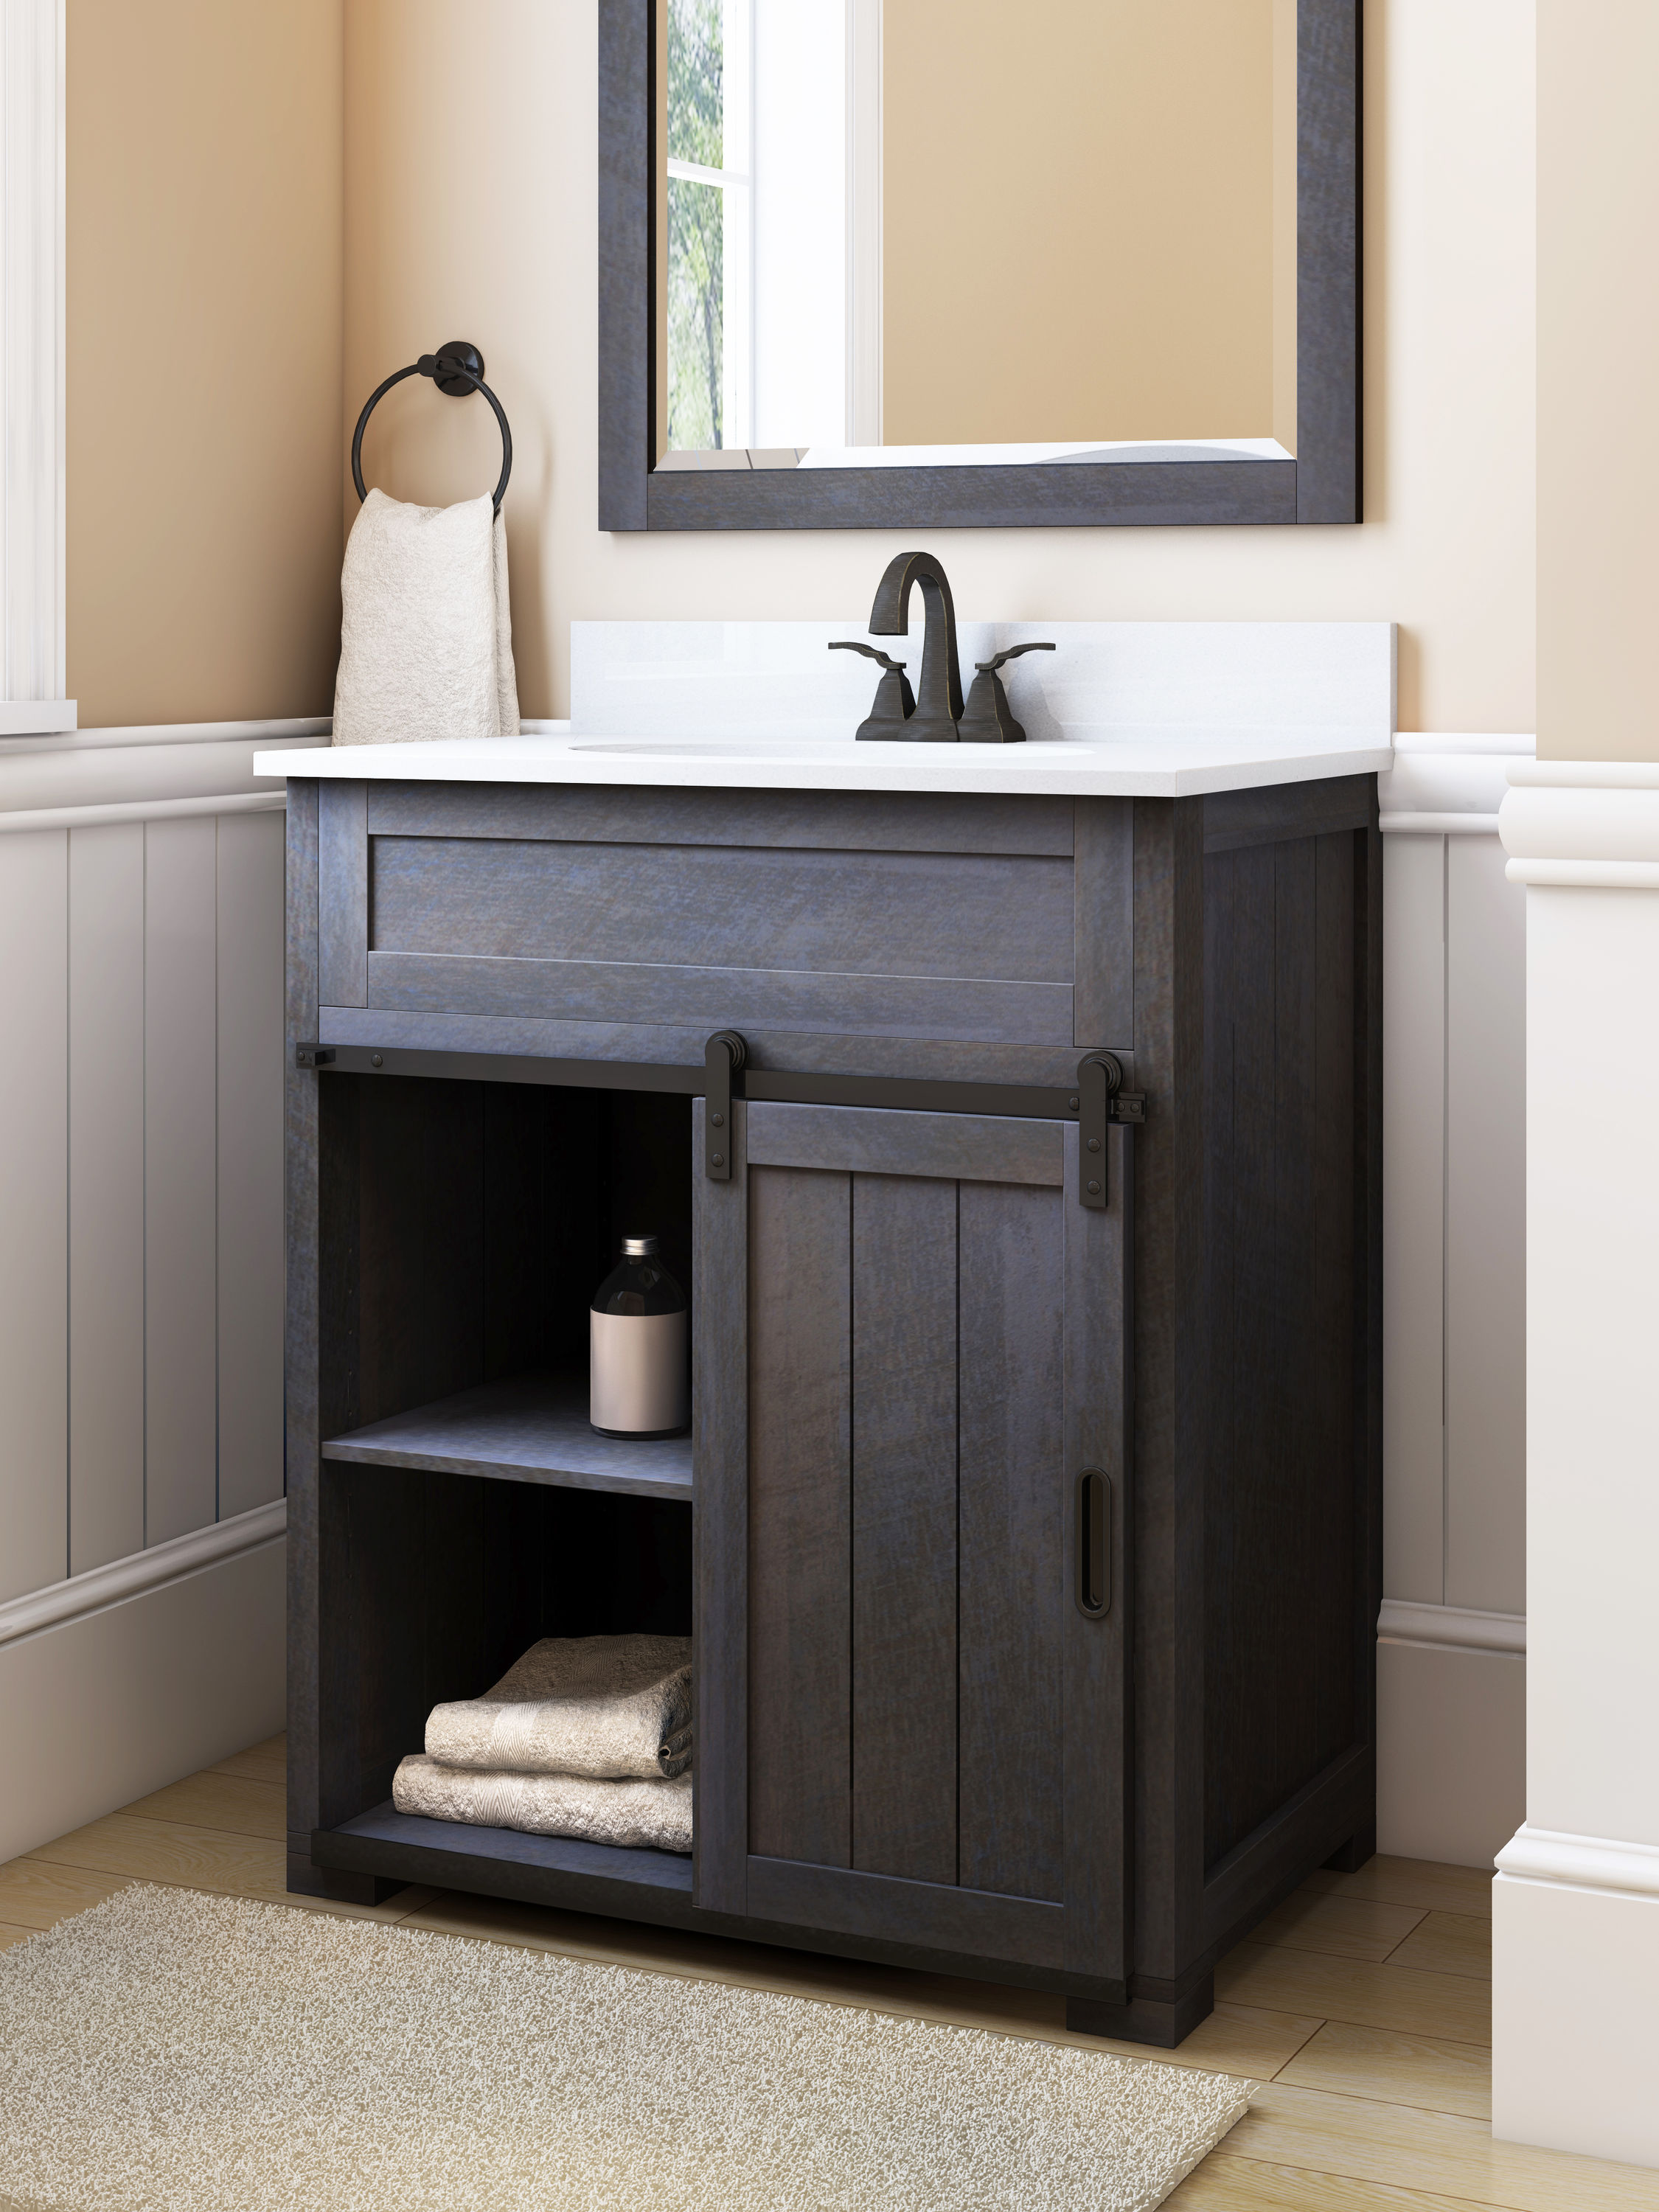 Bathroom Vanities, What Is The Standard Size Of A Single Sink Vanity Into Double